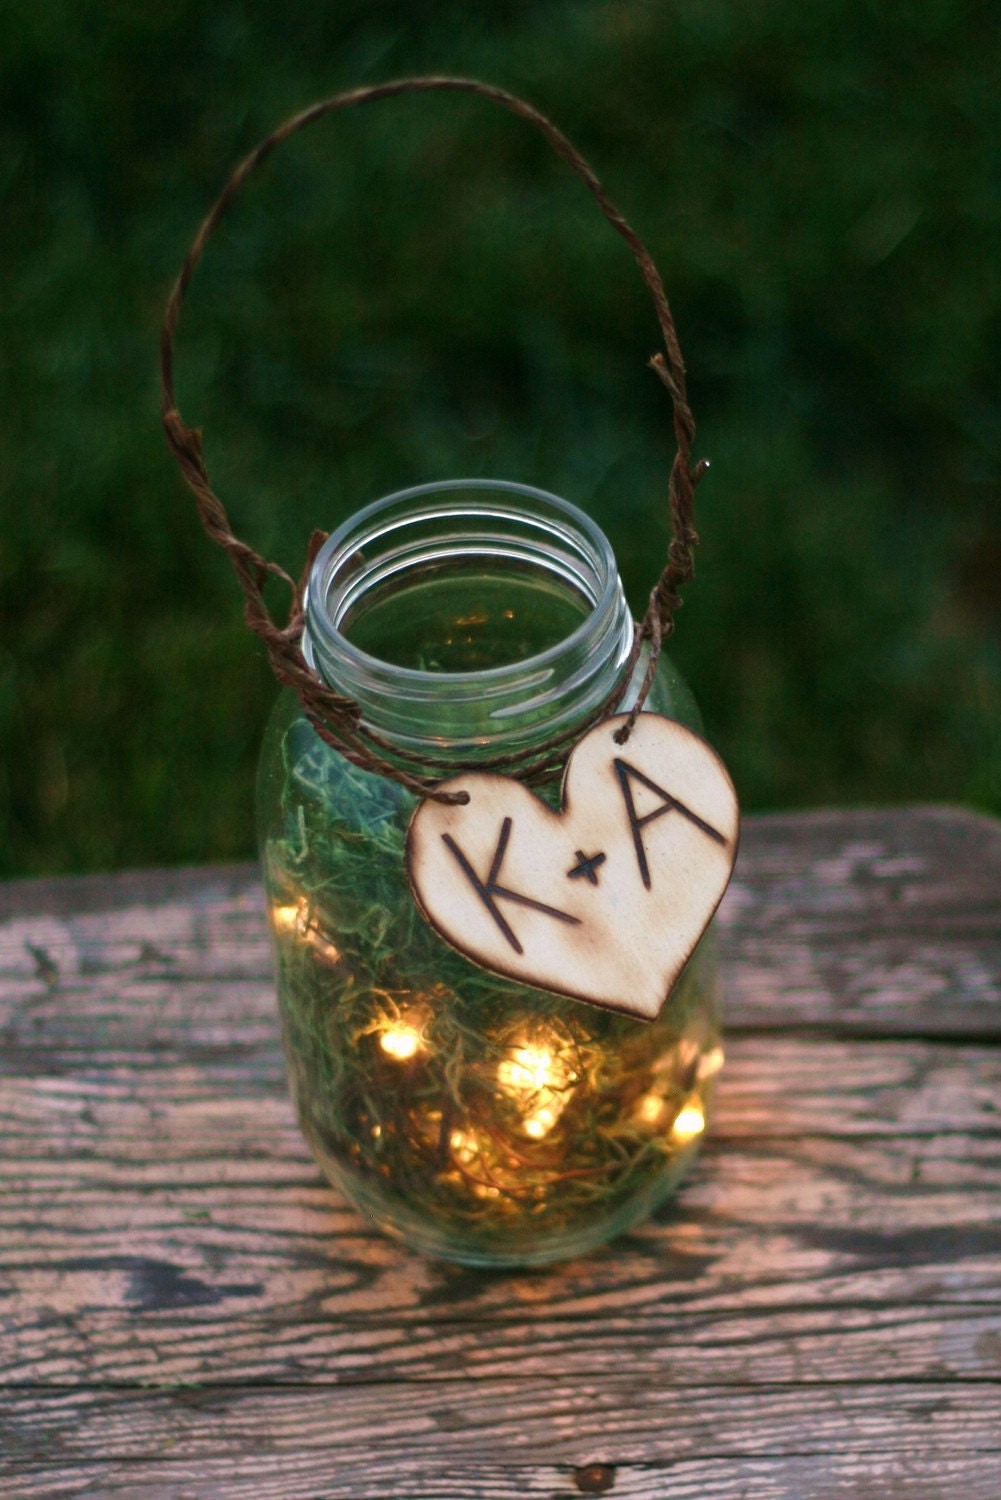 Set of 6 Upcycled Personalized Wood Glass Jar Outdoor Rustic Wedding Decoration Candles Firefly Lightning Bug Lanterns With Moss Woodland Forest Summer Fall CHIC